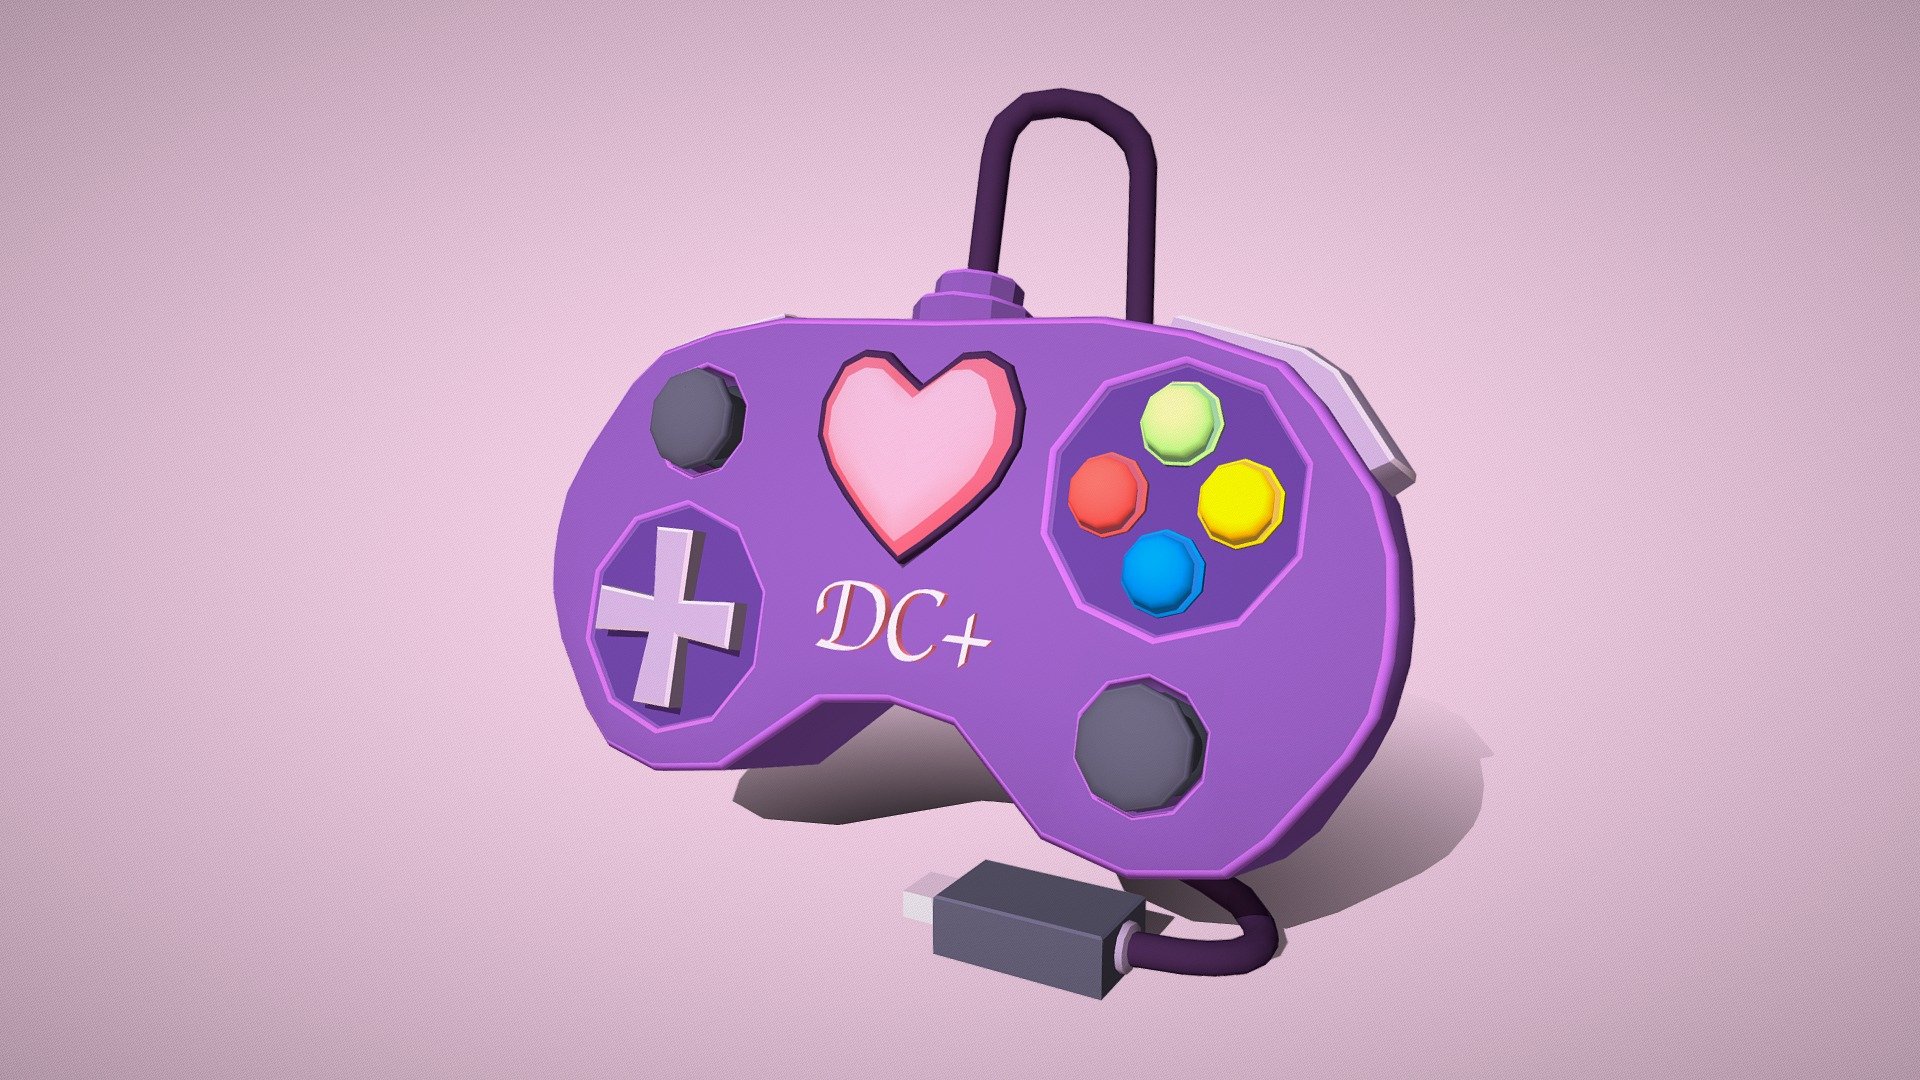 Diversity Collective + is an inclusive community within the Seattle Indies with a mission to support diversity and discuss issues and solutions for minority figures in gaming and VR/AR/XR. This 3D model is a render based off of the Diversity Collective + logo of an adorable purple cartoon controller by Ashley Rivas 3d model